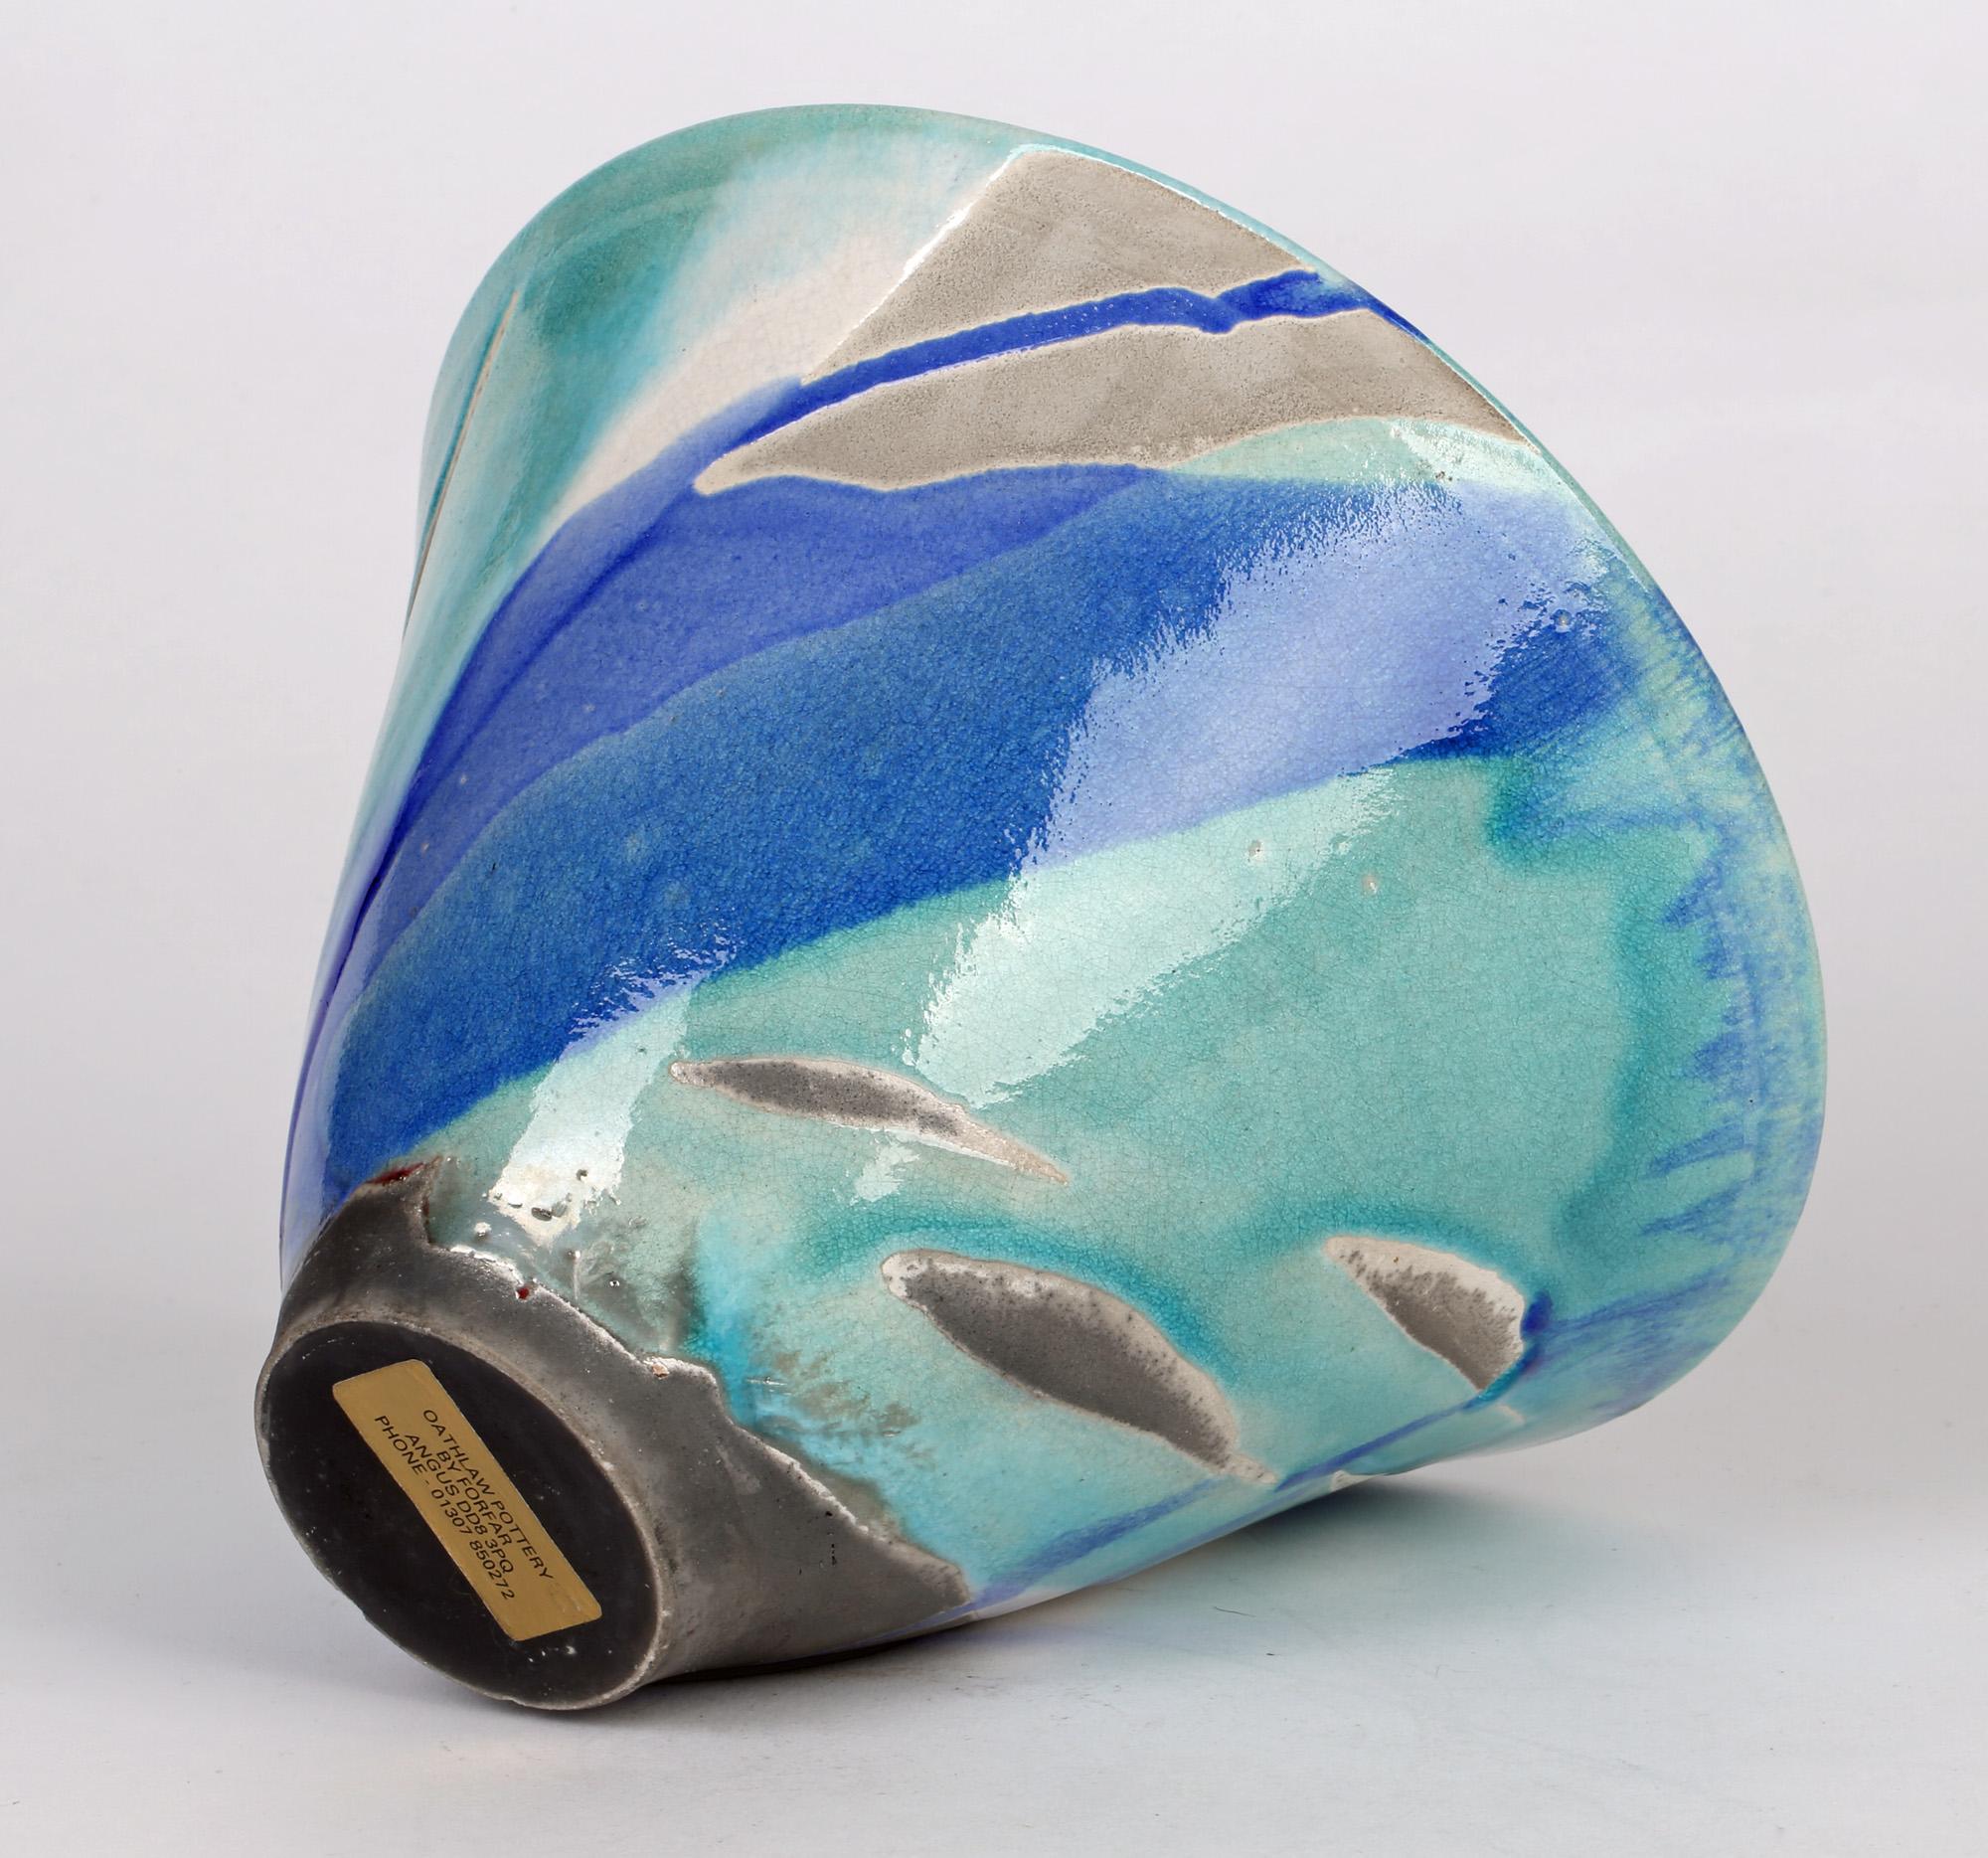 A striking Scottish studio pottery raku glazed bowl with turquoise and blue glazes by Maggie Kinnear. This bowl originates from the Oathlaw Pottery which started in 1988 and we believe it is an early example. Of conical shape the bowl stands on a